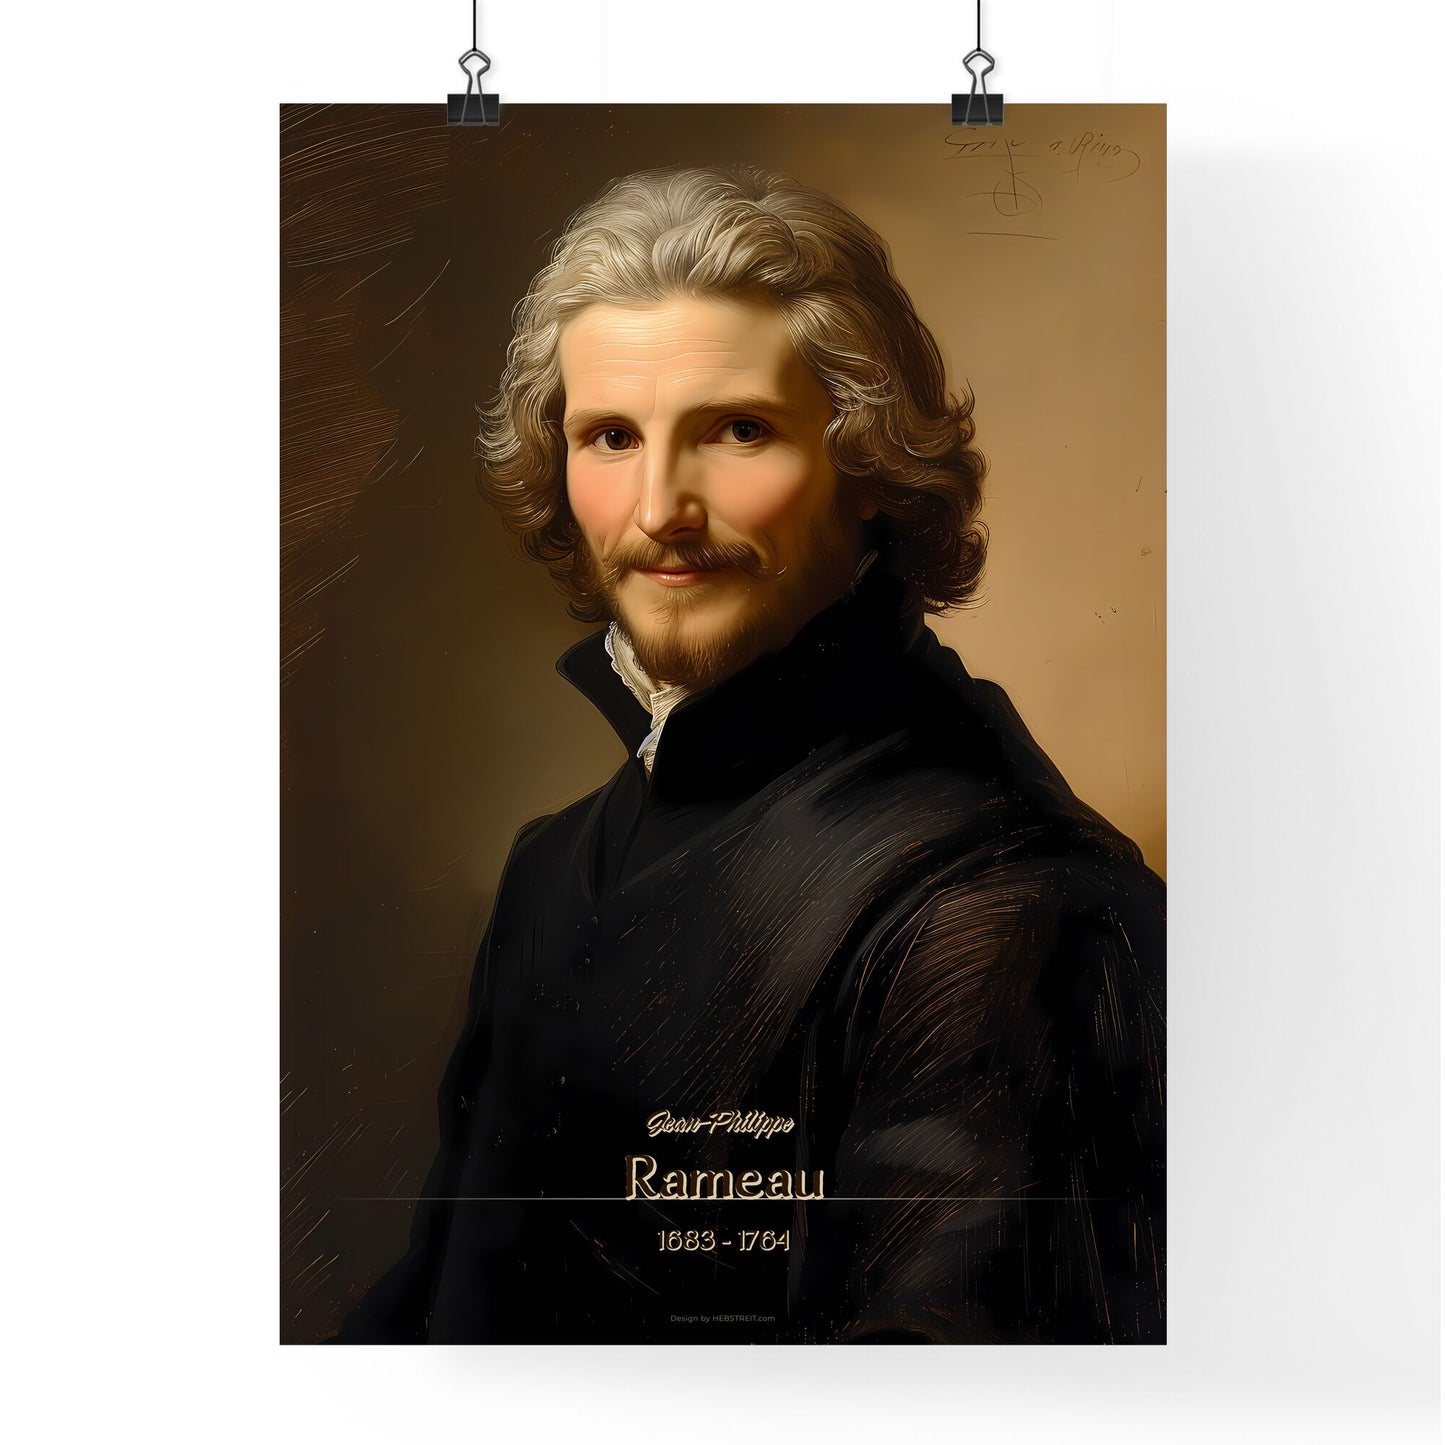 Jean-Philippe, Rameau, 1683 - 1764, A Poster of a man with a beard and mustache Default Title